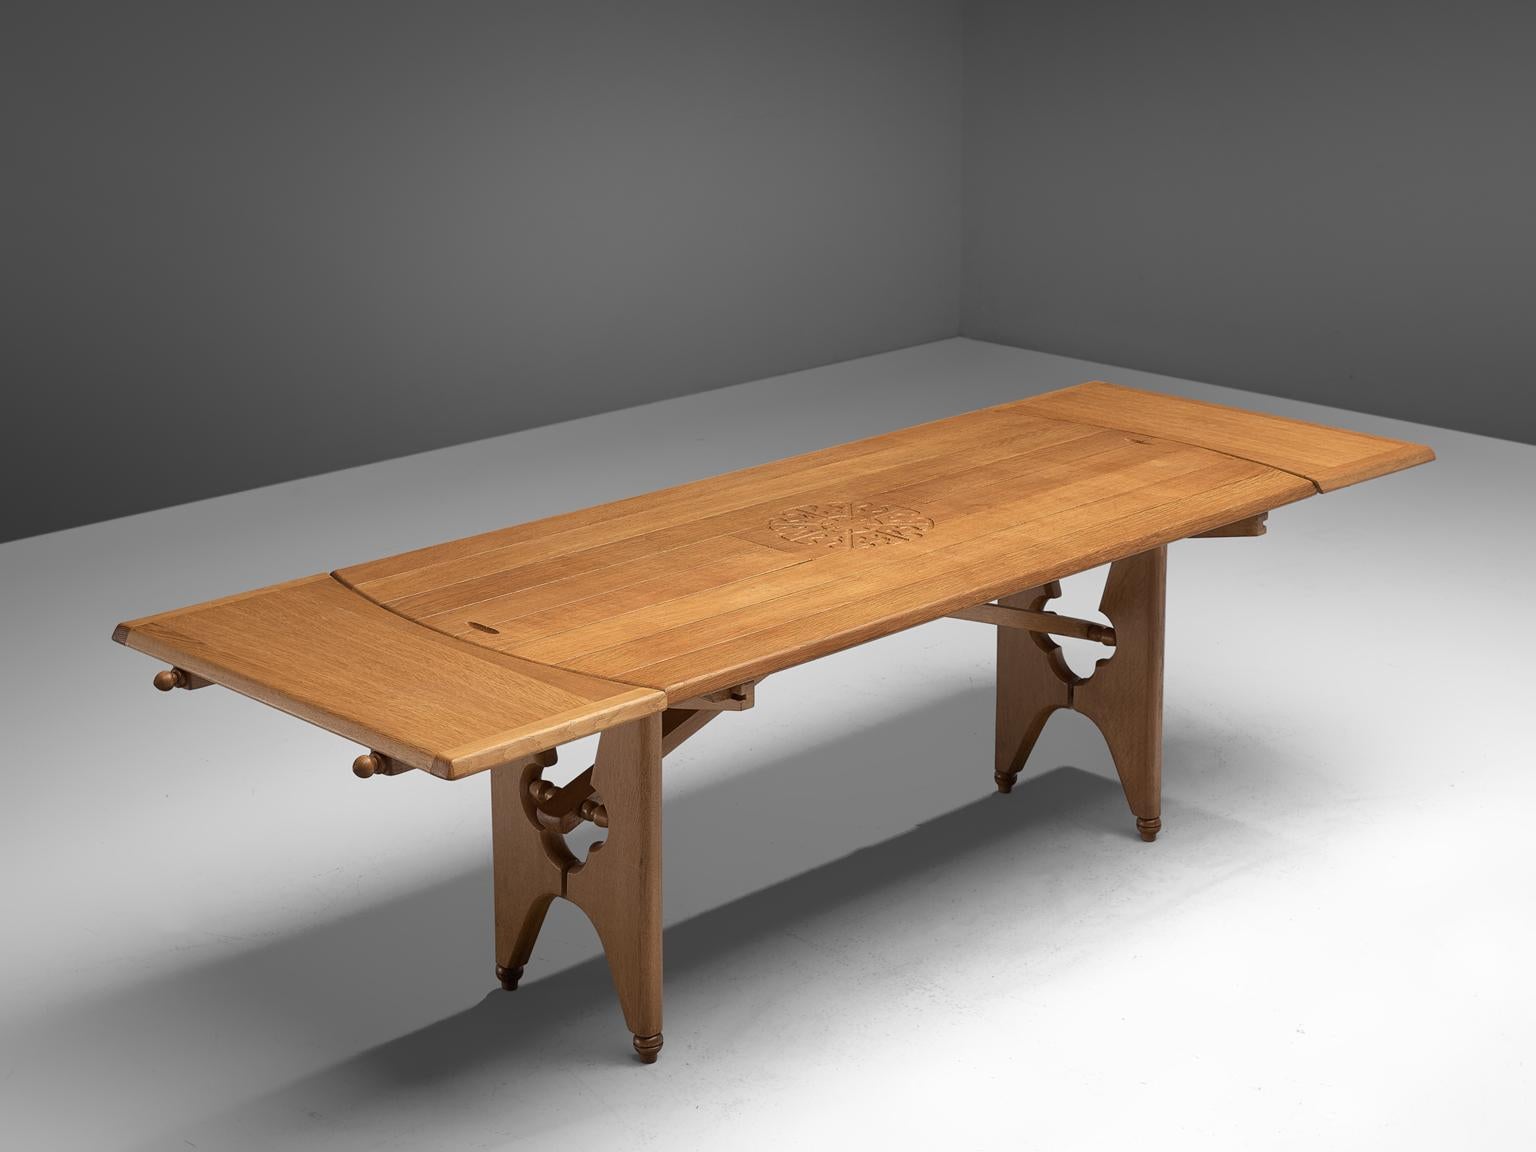 Guillerme et Chambron, dining table, oak, France, 1960s.

Extendable dining table in solid oak by French designers Guillerme et Chambron. This elegant table shows interesting details. Most attractive are the stunning sculpted legs that show